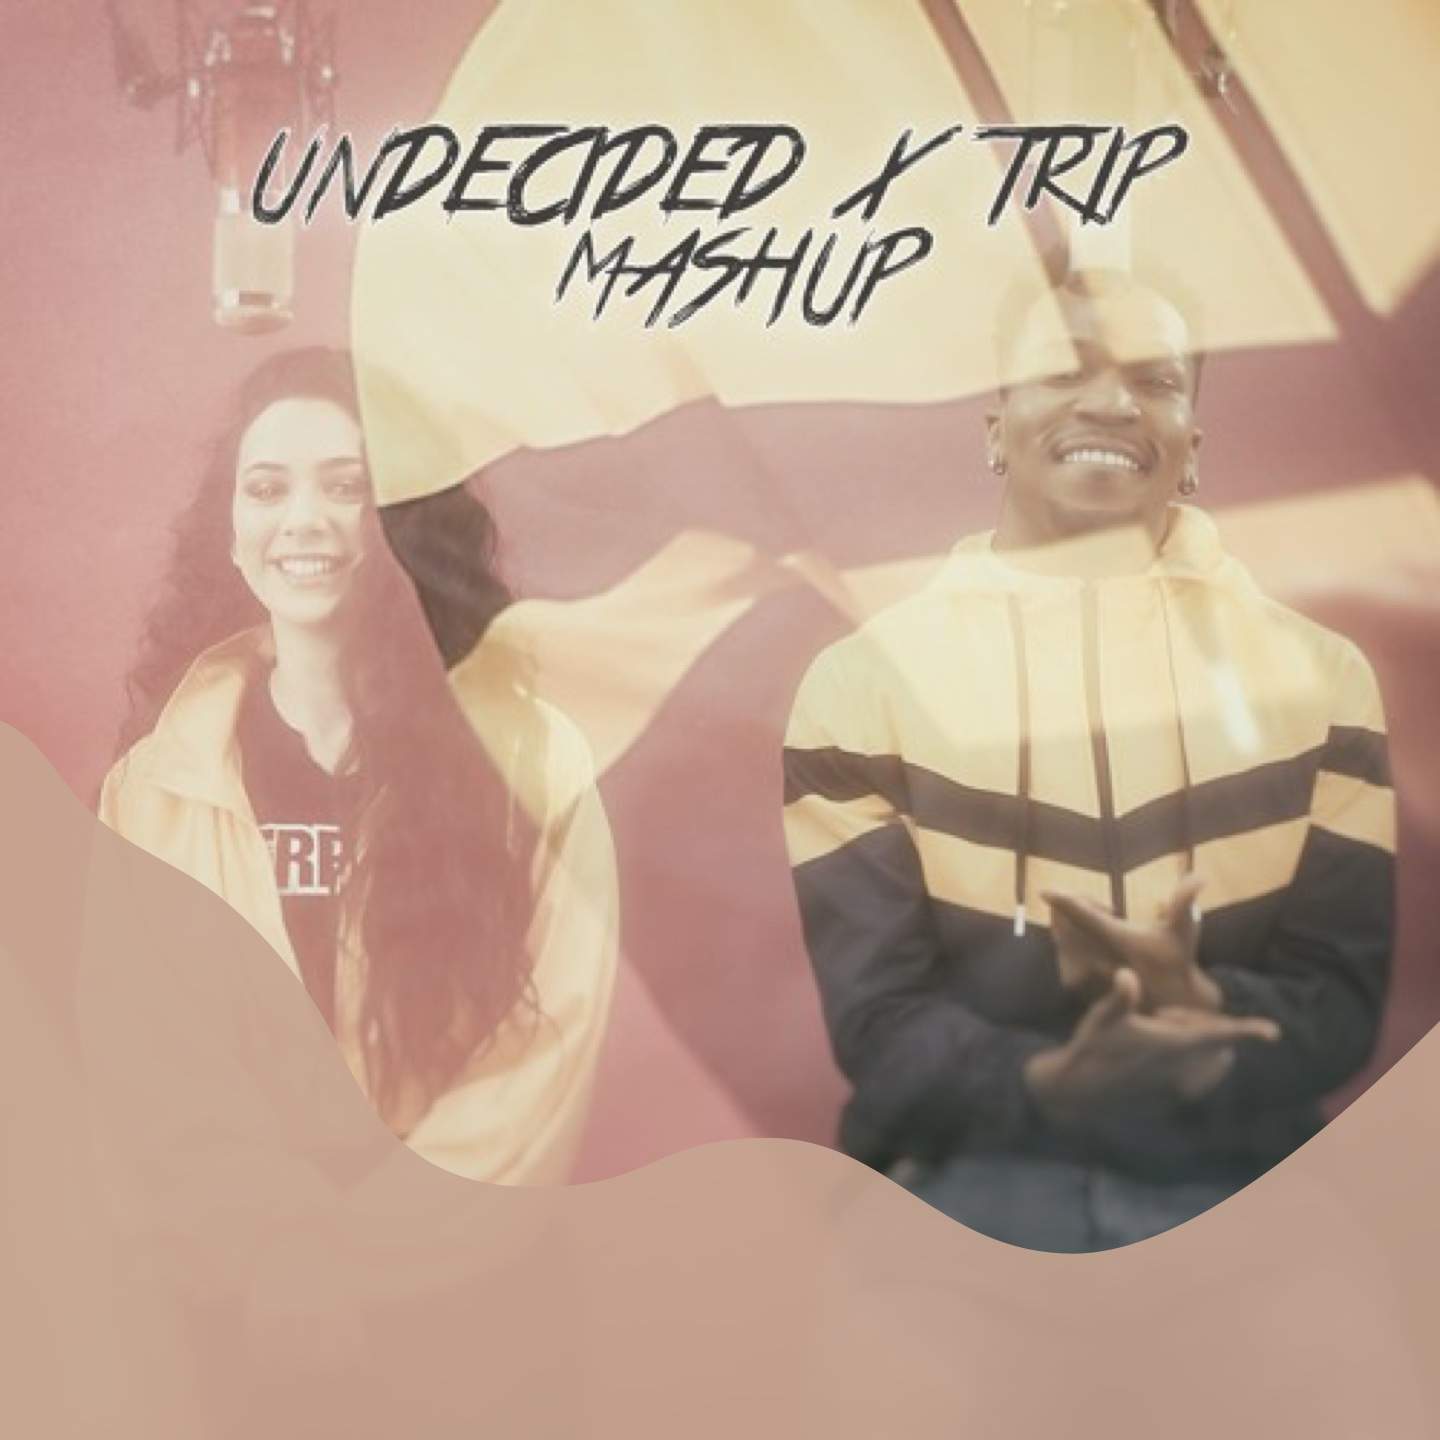 Undecided / Trip (Mashup) feat. Calista Quinn -
                    Luxe radio